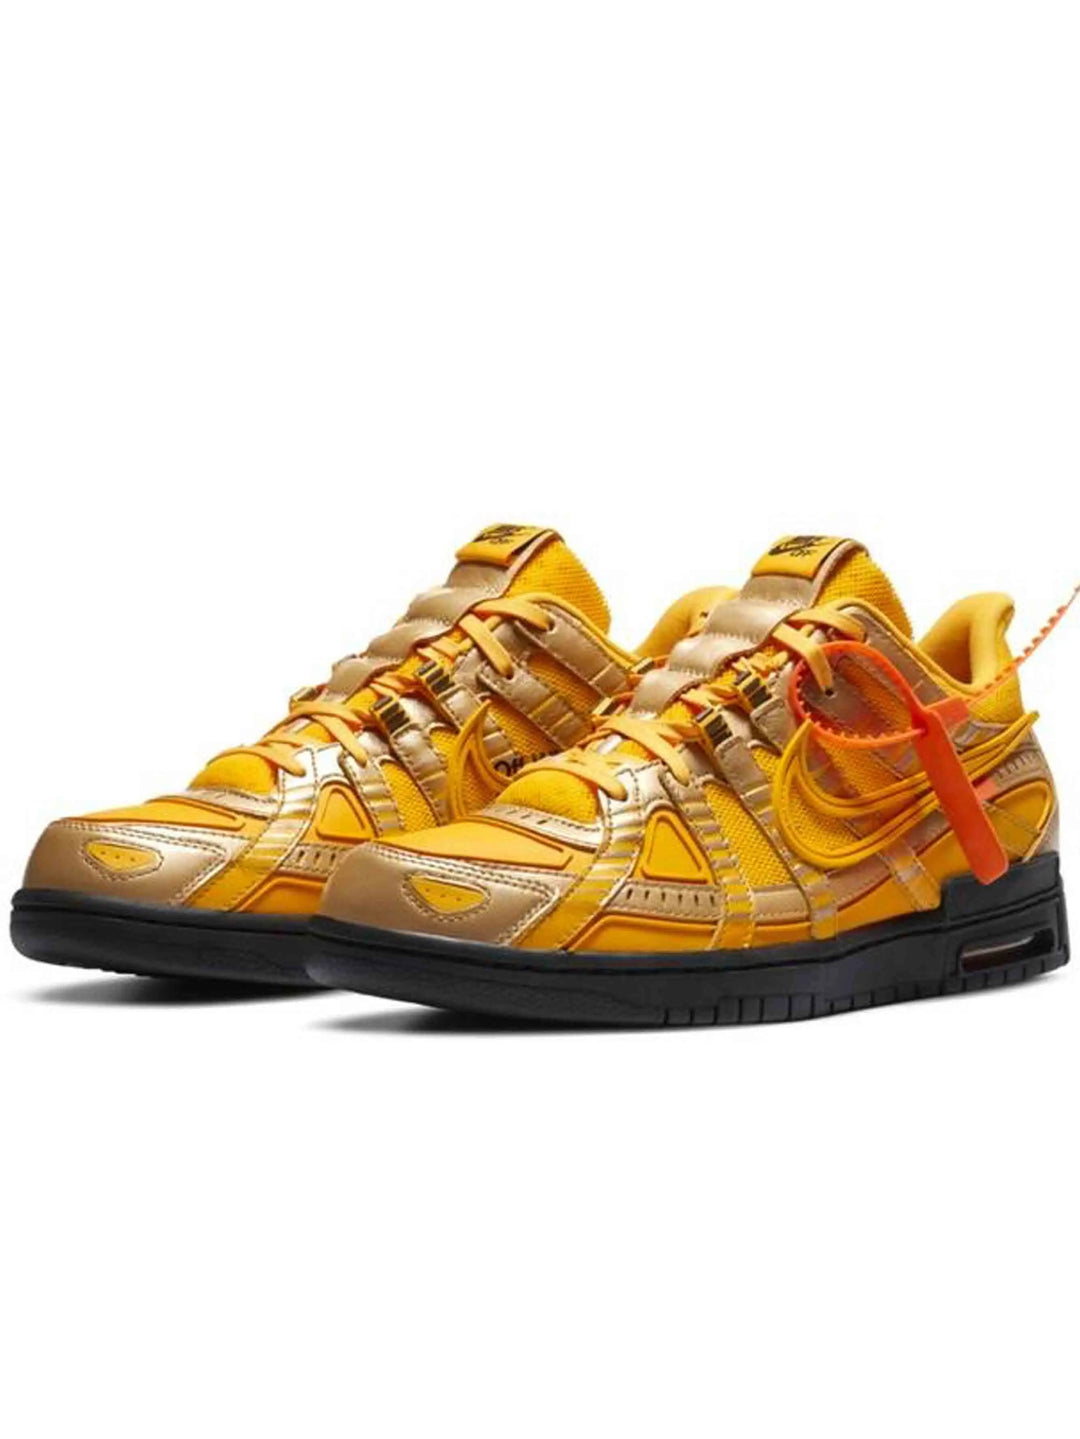 Nike Air Rubber Dunk Off-White University Gold Prior